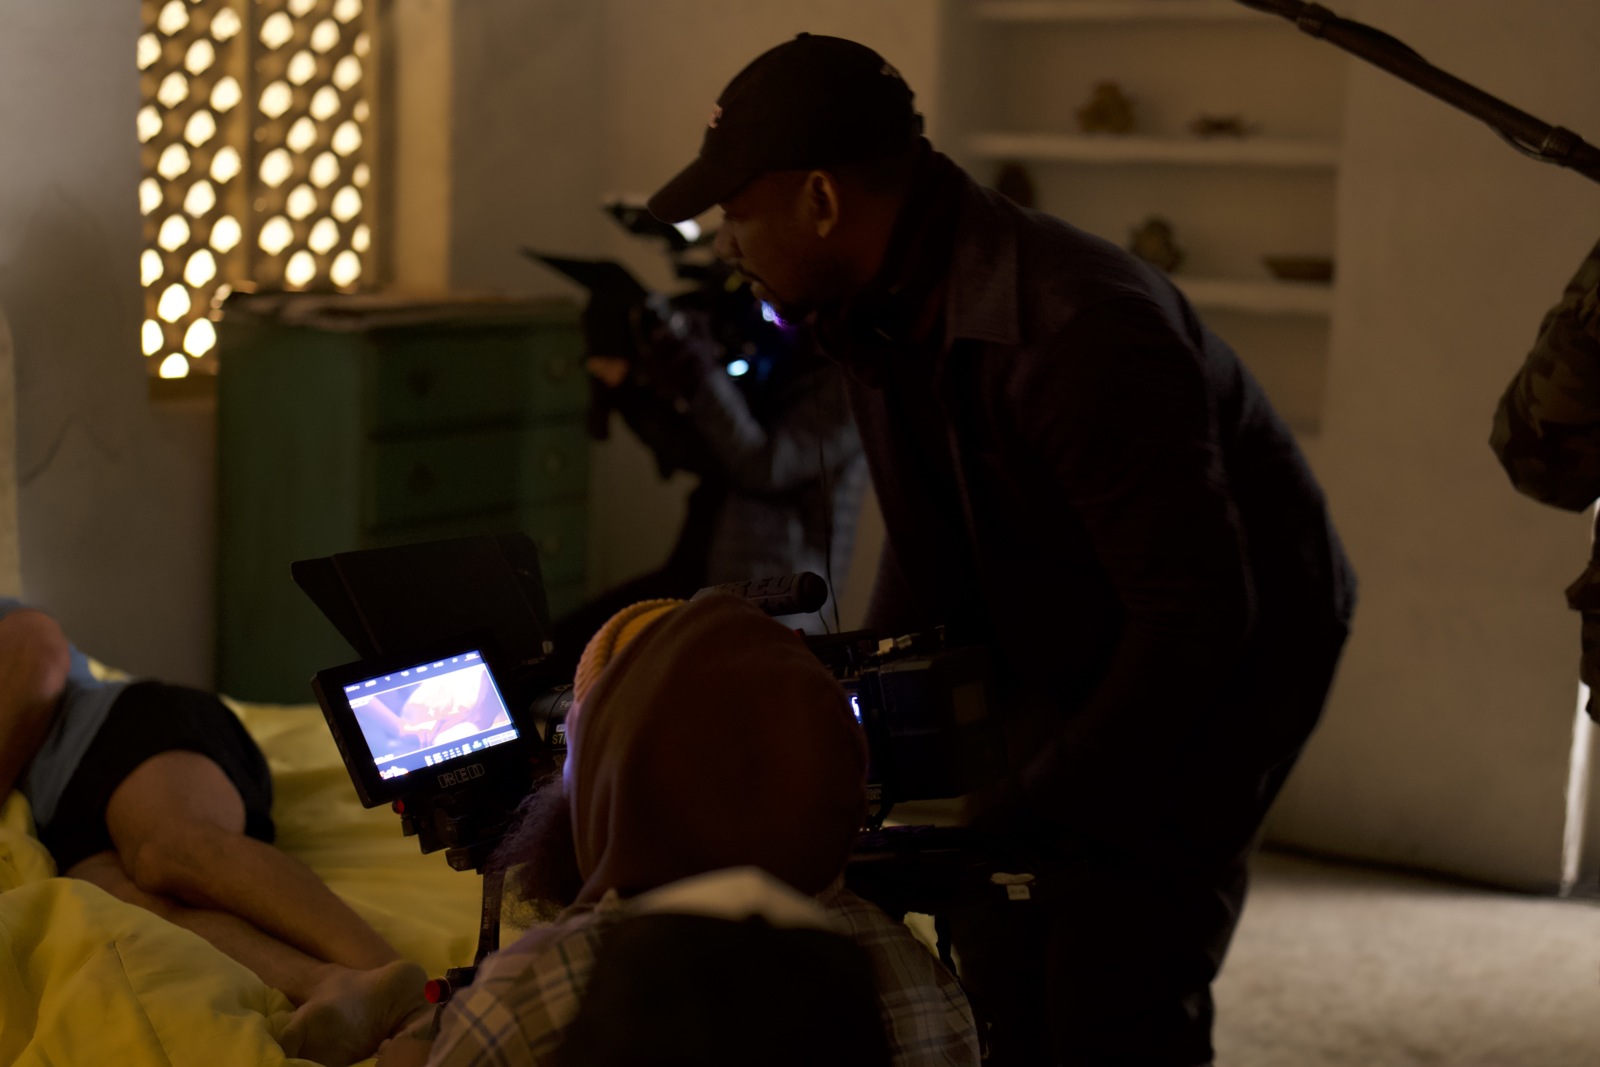 Side profile of Joshua wearing a black ball cap looking at video camera video display on set during a shoot